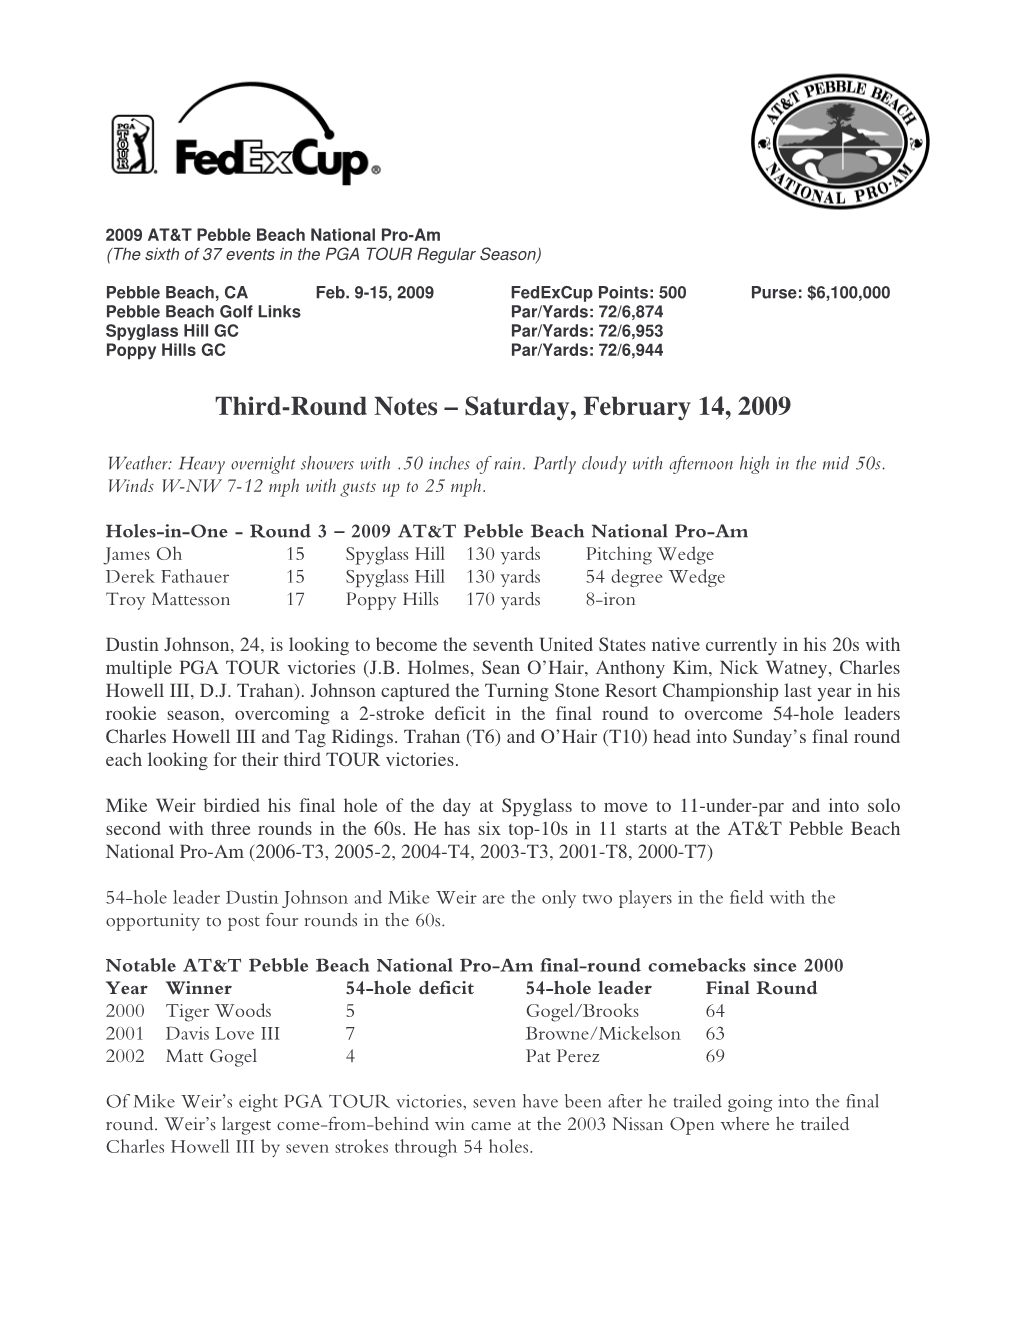 2009 AT&T Pebble Beach Round 3 Notebook